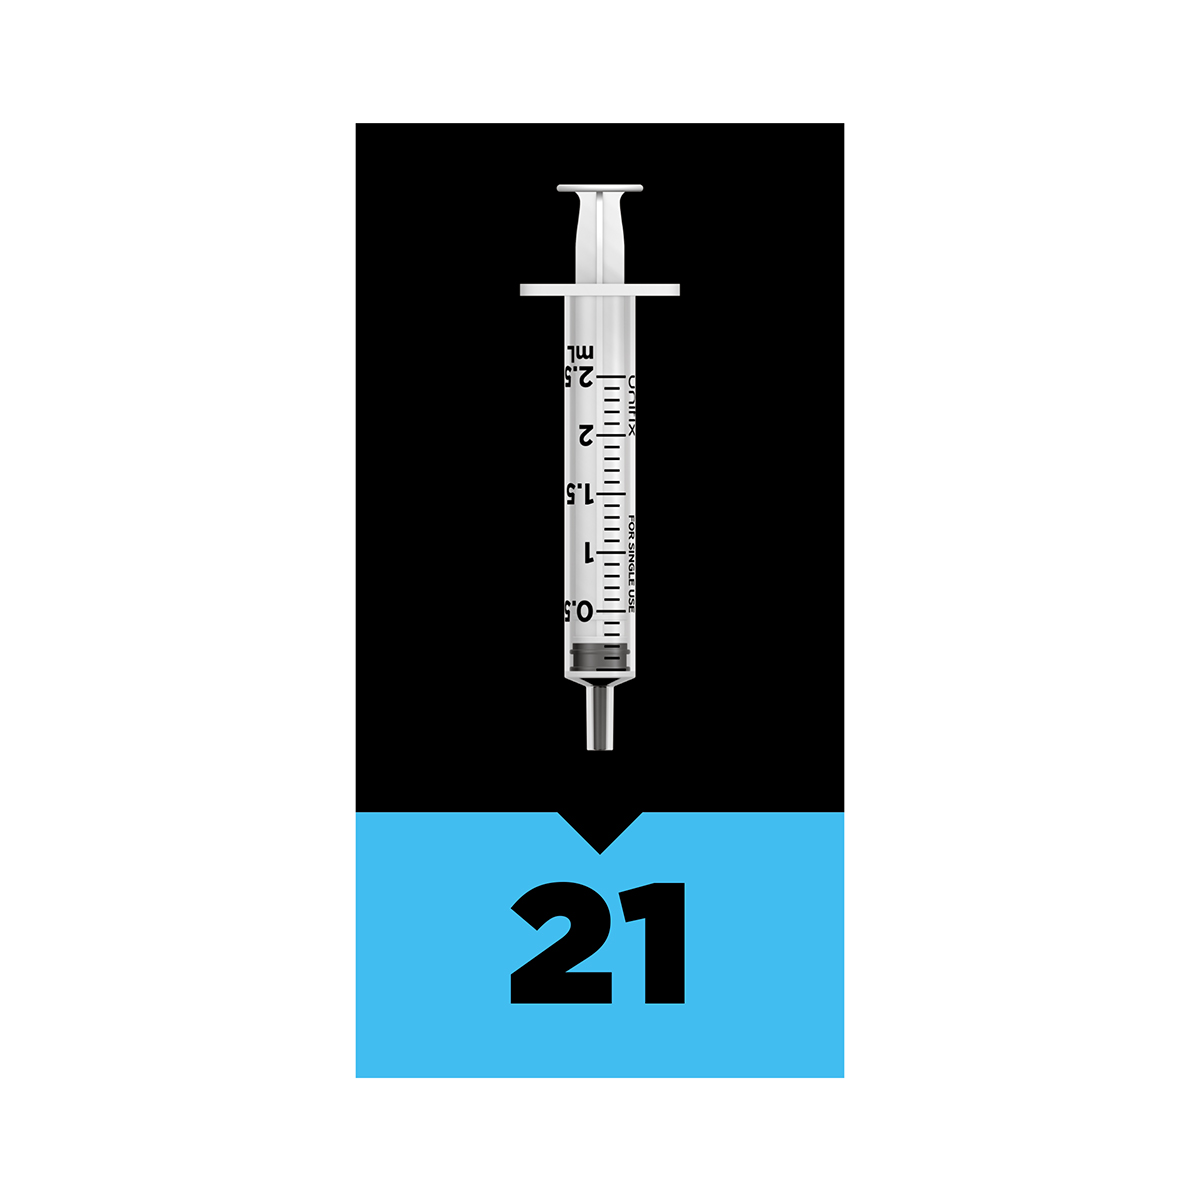 Steroid 12 Week Cycle Kit | 21 syringes | 1 injection every 4 days